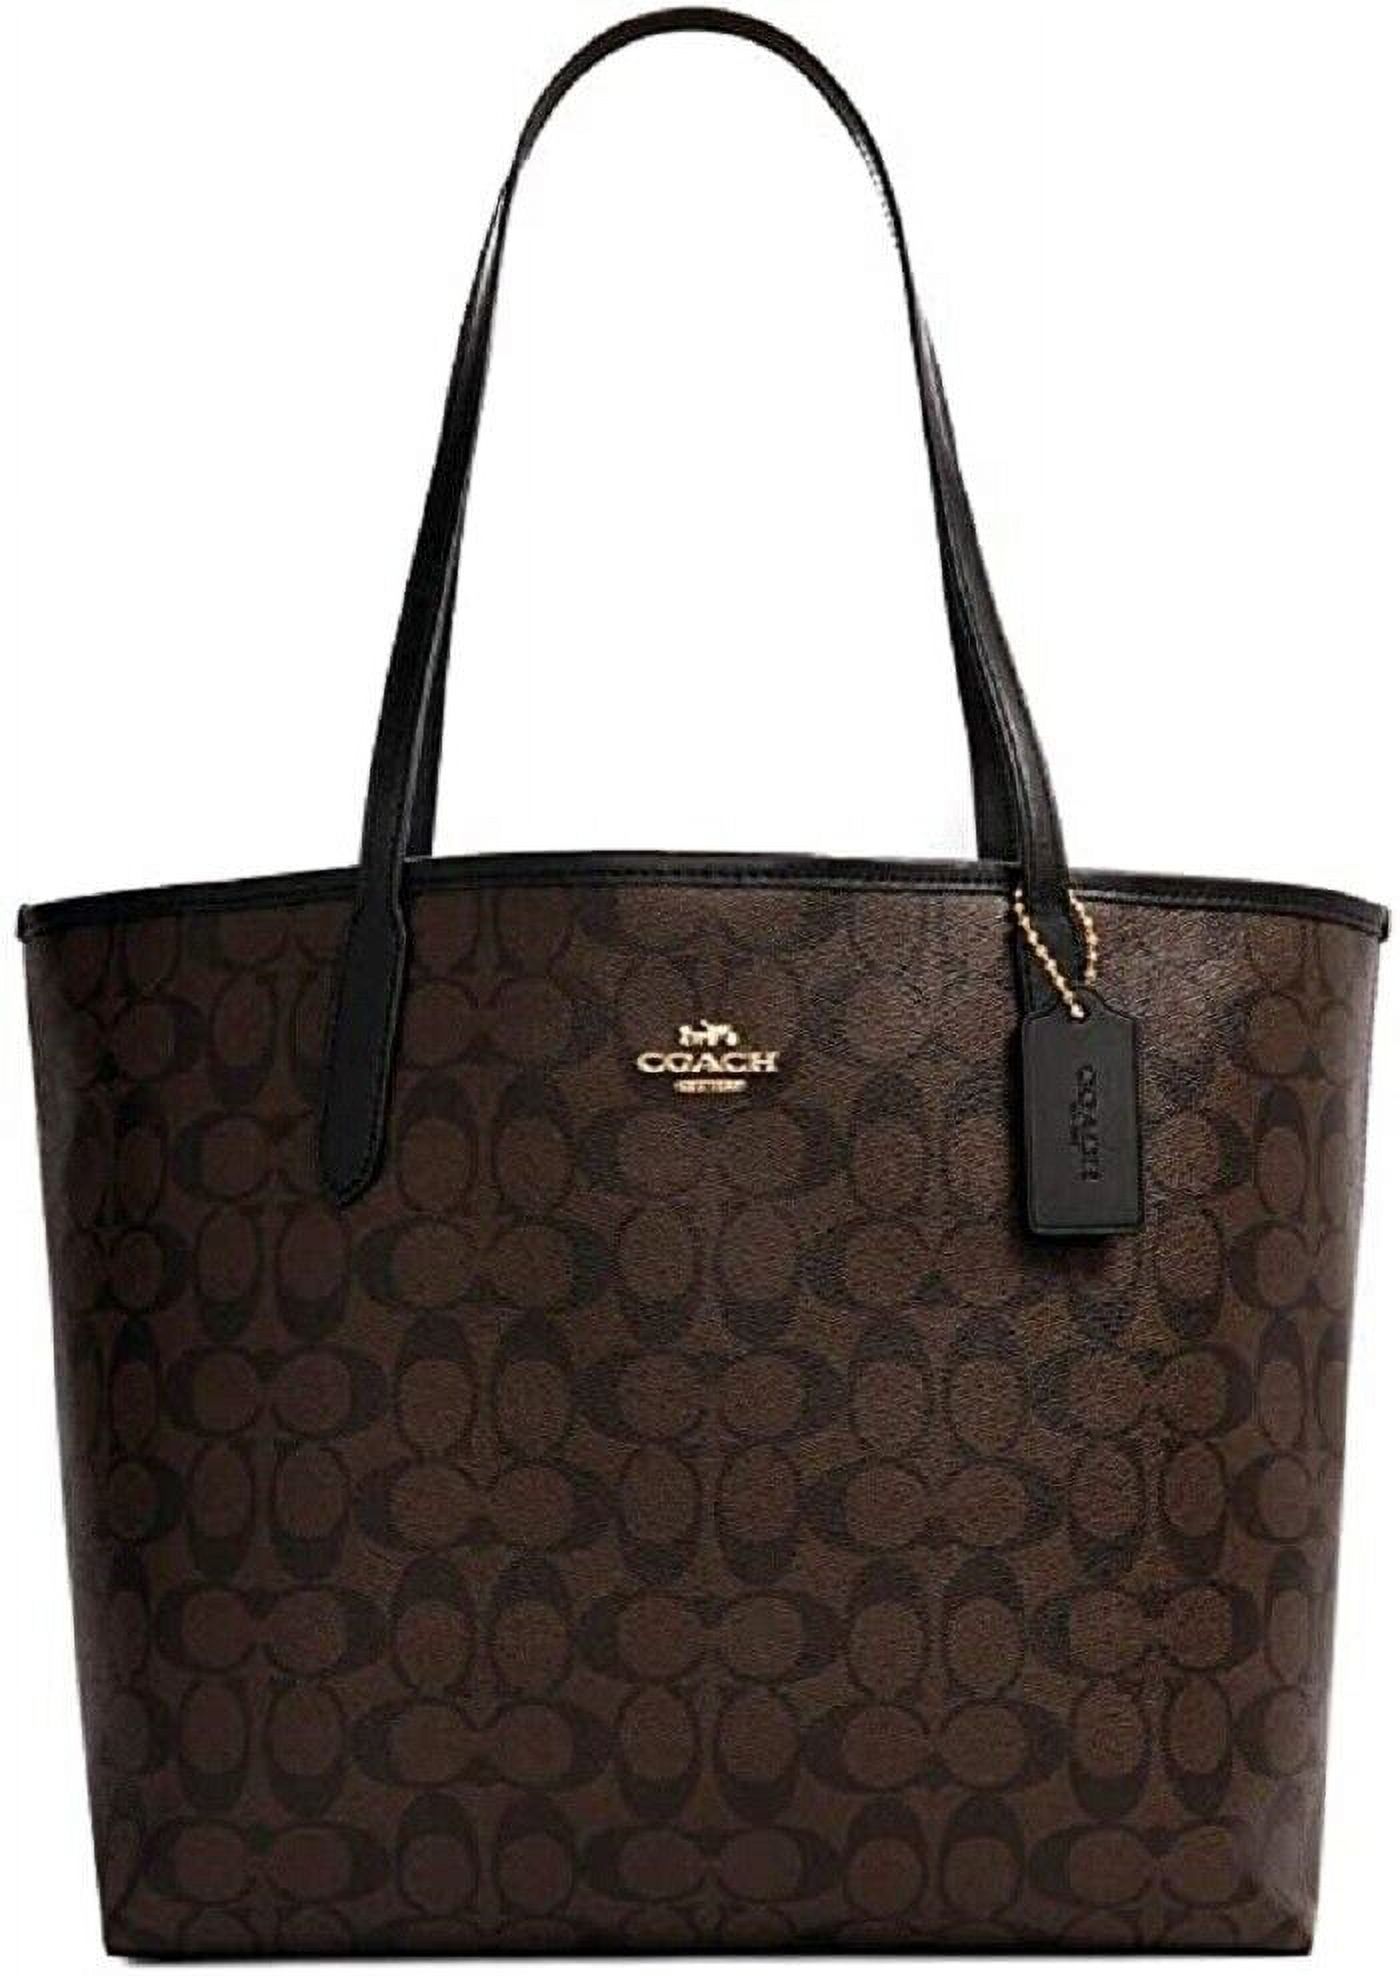 Coach Womens 5696 City Tote In Signature Canvas Handbags Brown/Black, Female - image 1 of 4